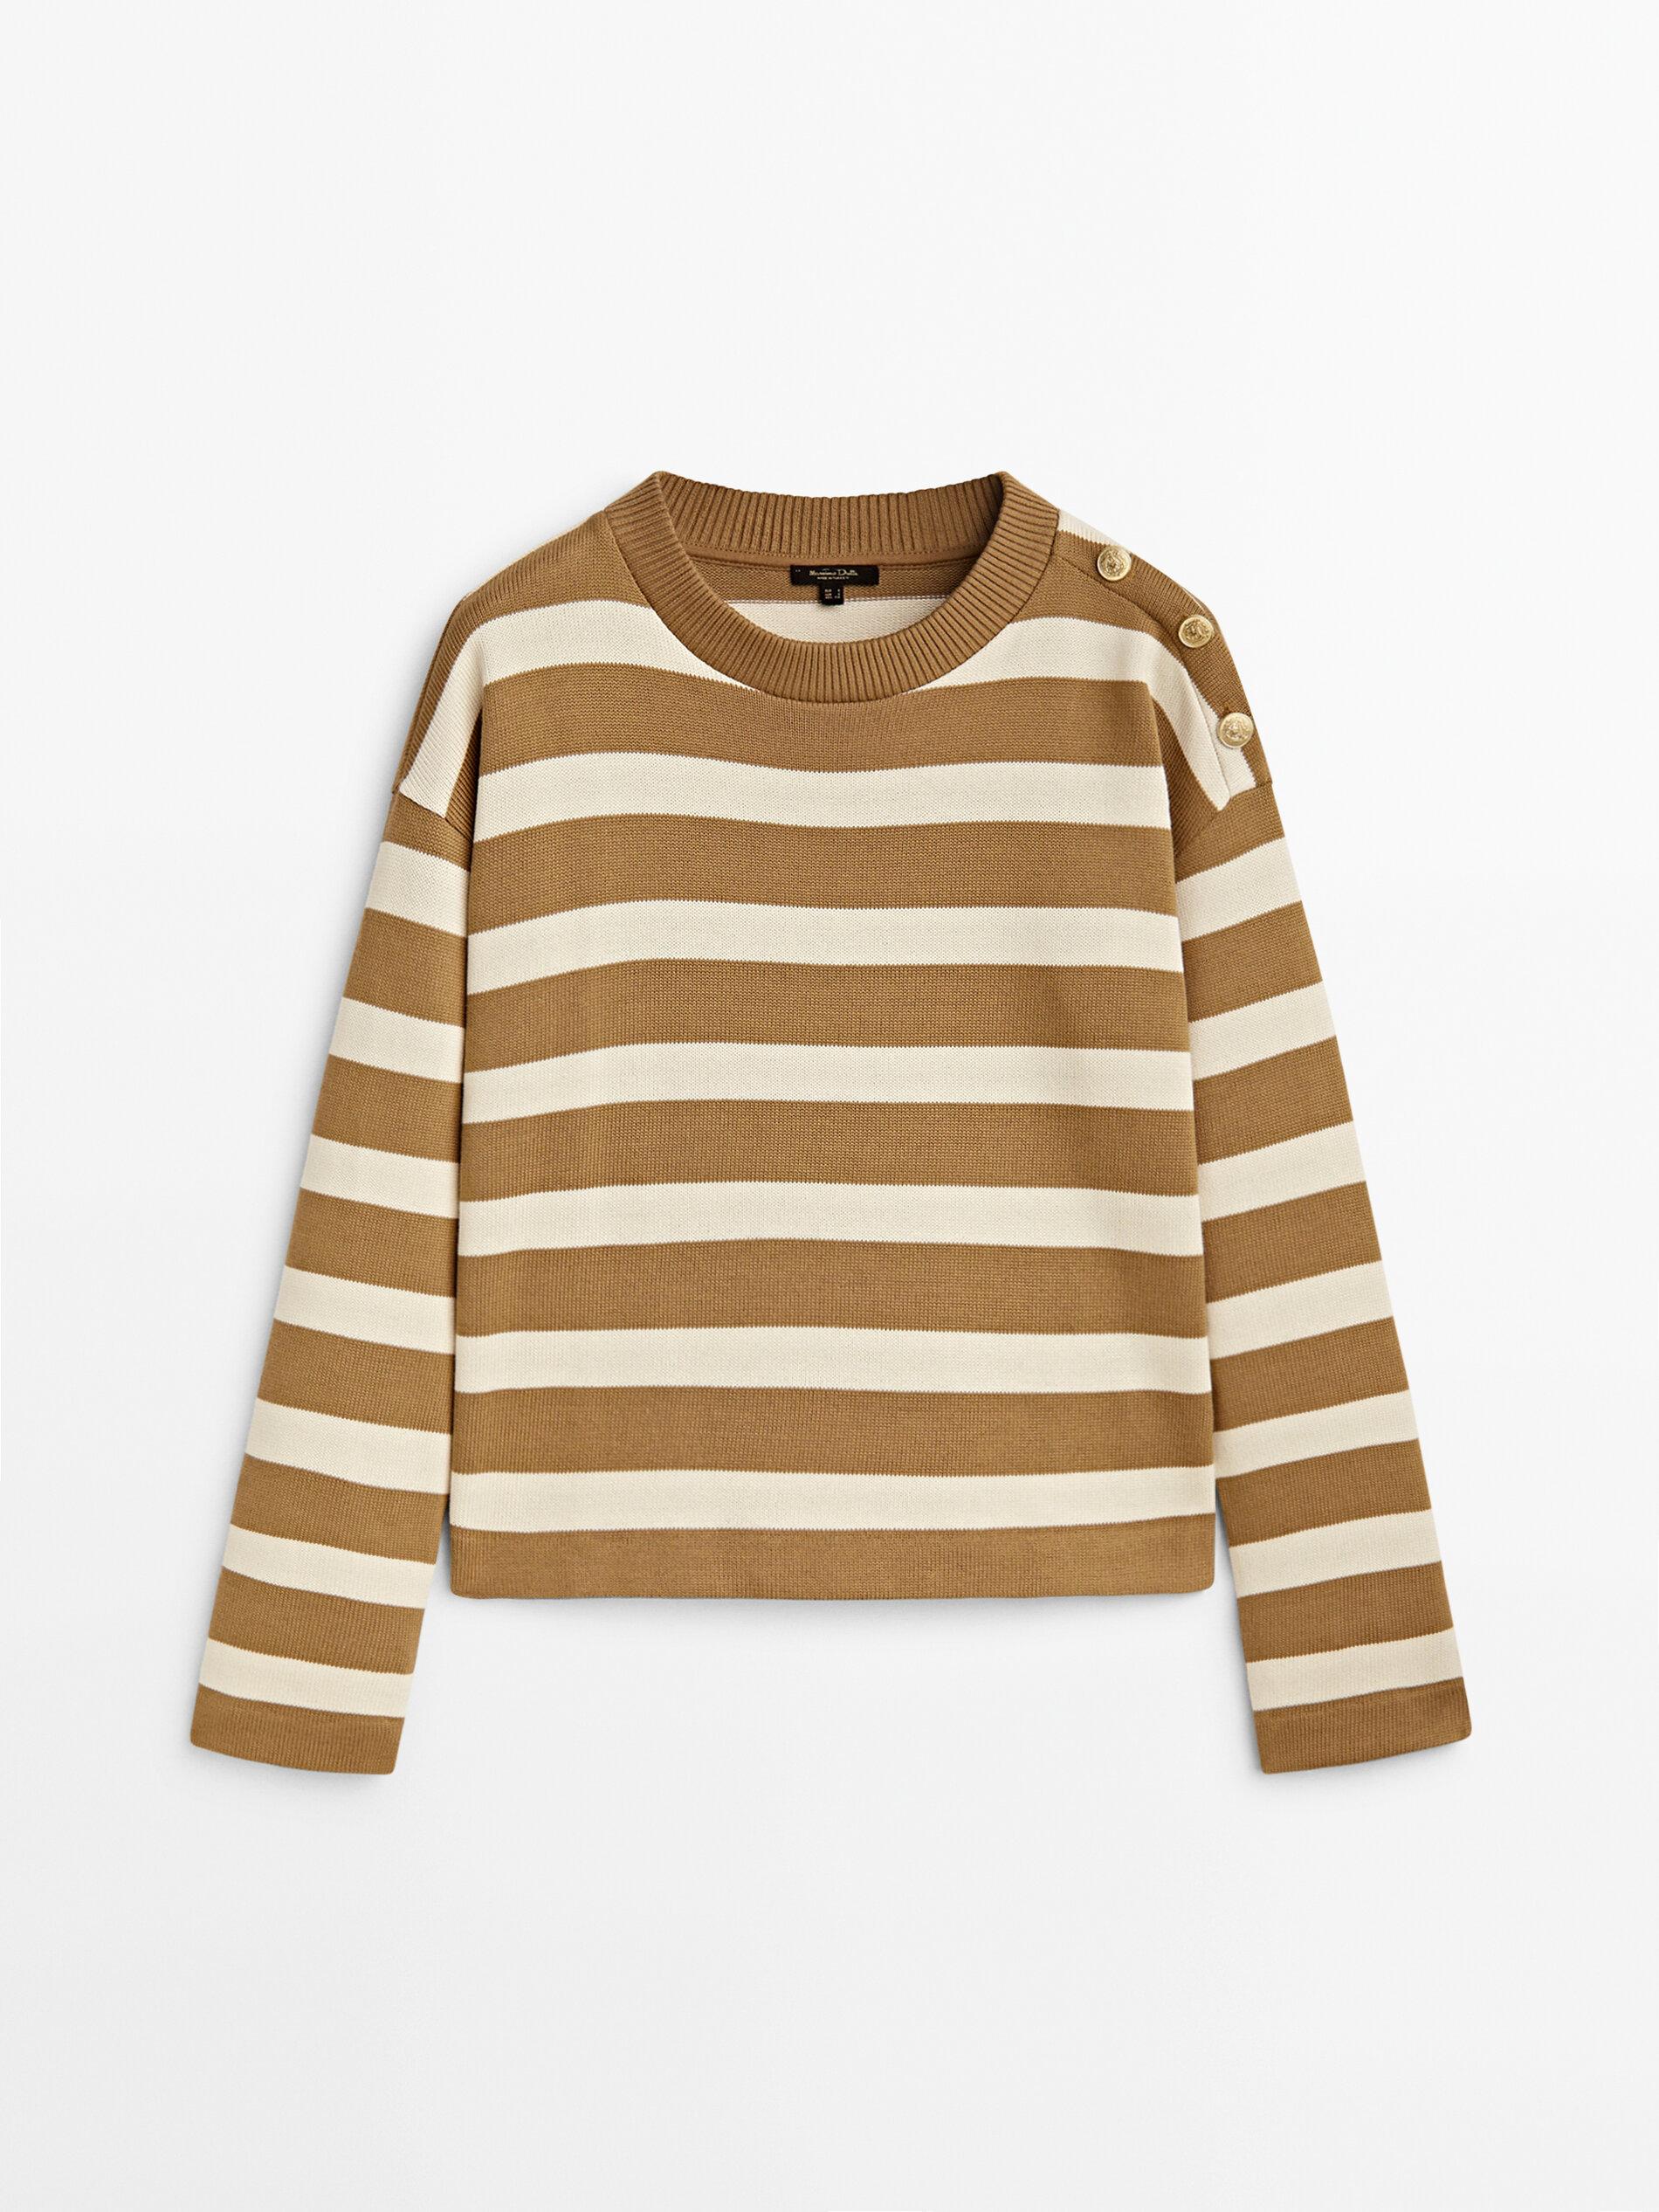 MASSIMO DUTTI Striped Sweatshirt With Button Details in Natural | Lyst